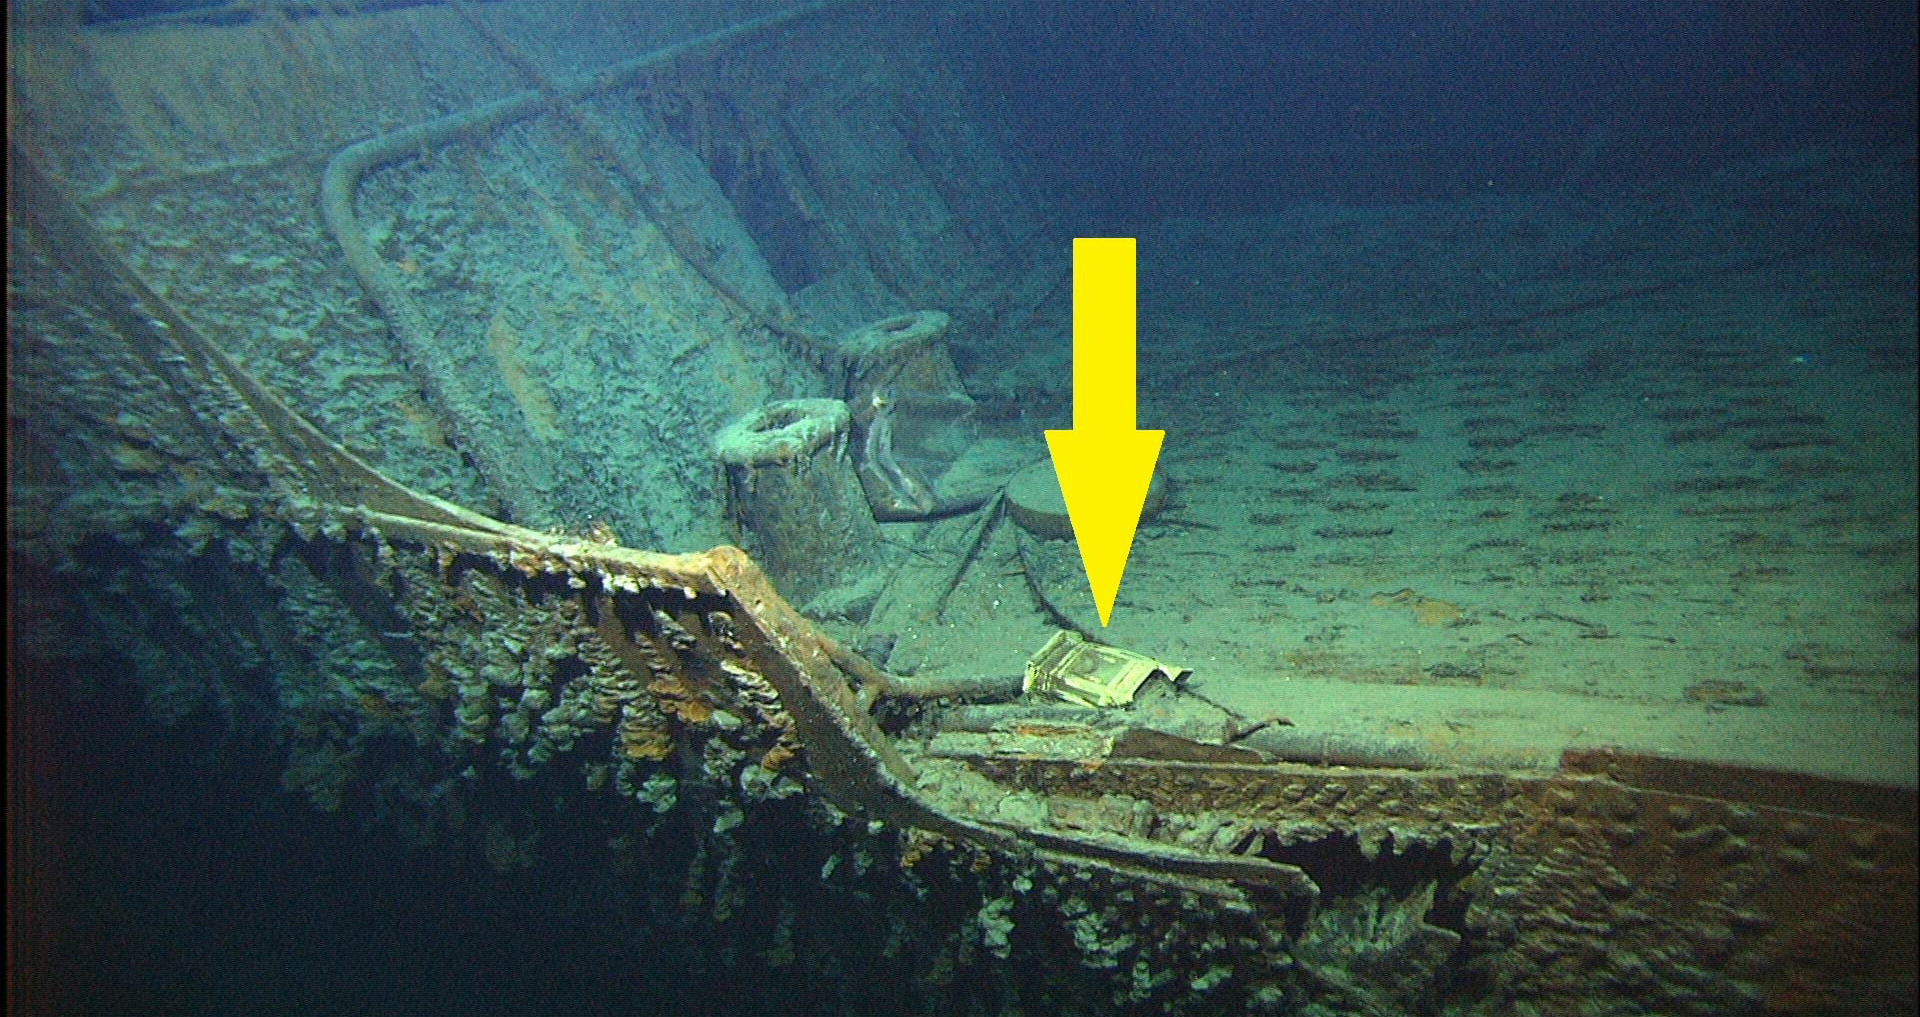 Titanic's Officers - Captain Smith and the Titanic Wreck